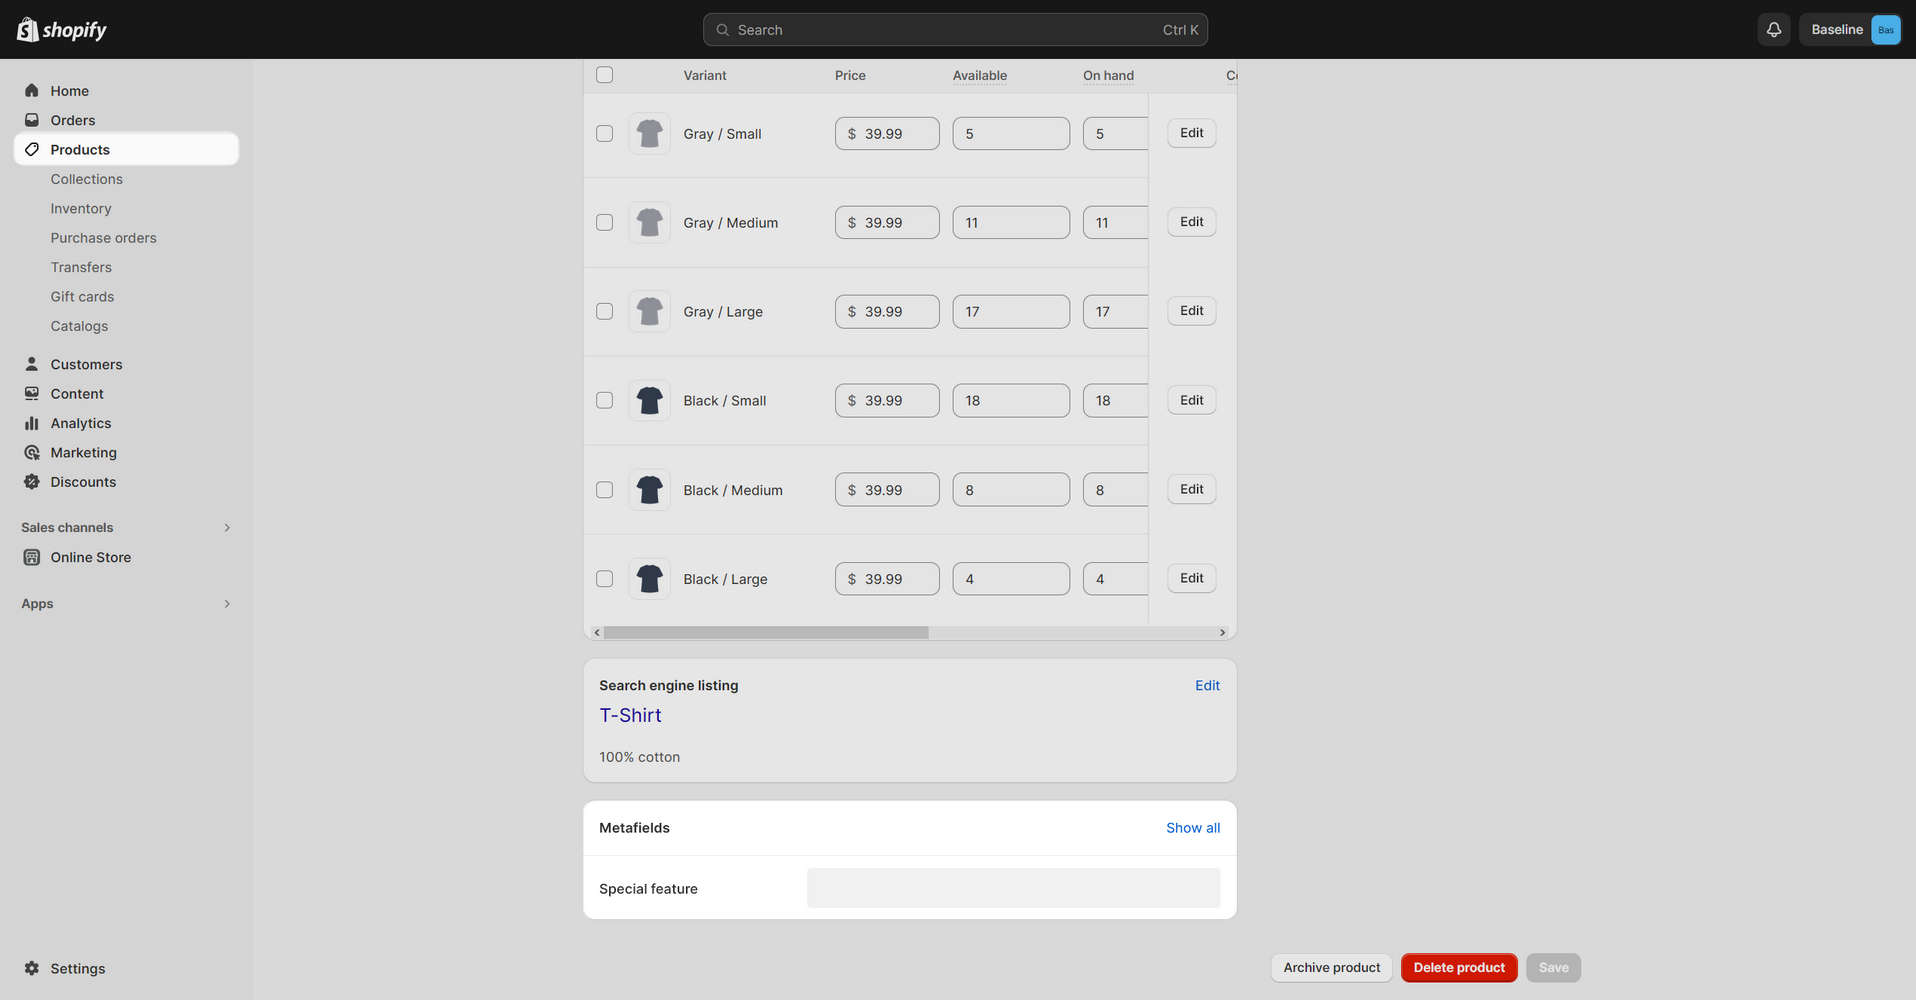 The metafield pane selected in Shopify's Product editor.